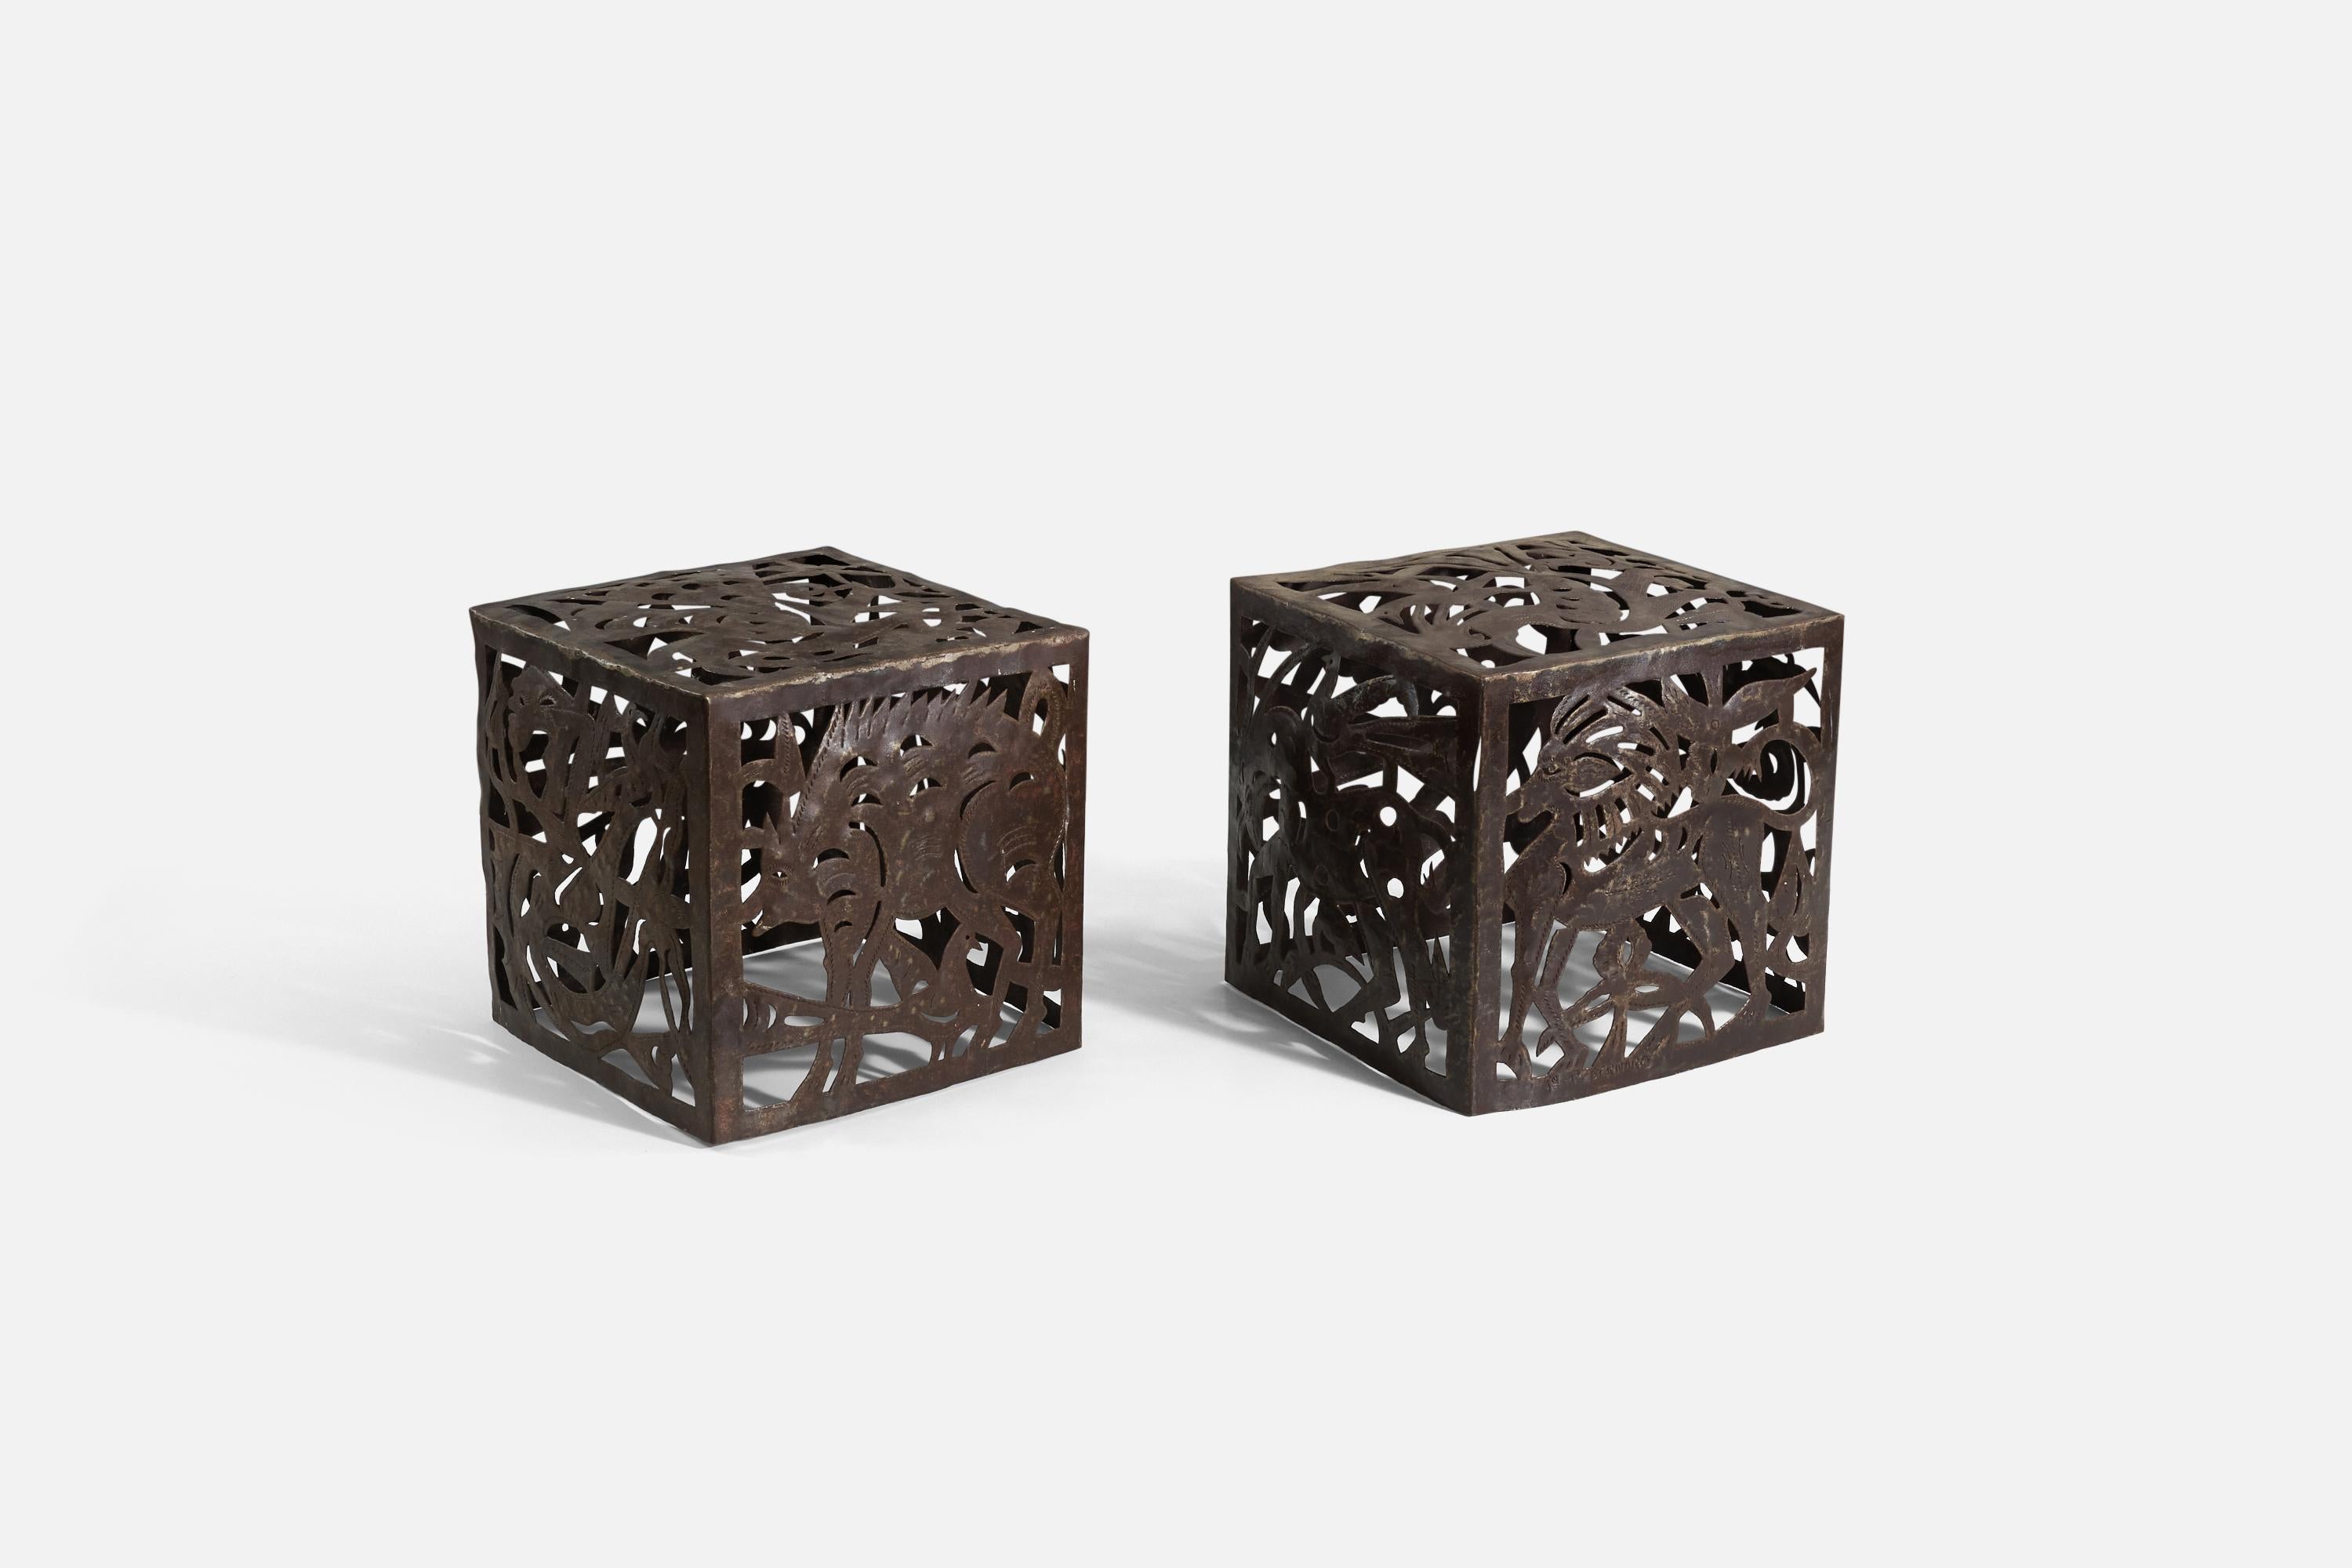 A pair of two steel side tables / end tables, produced by Jean Pierre Bernard. Haiti, 1960s. Acquired by Harvey Probber Furniture.